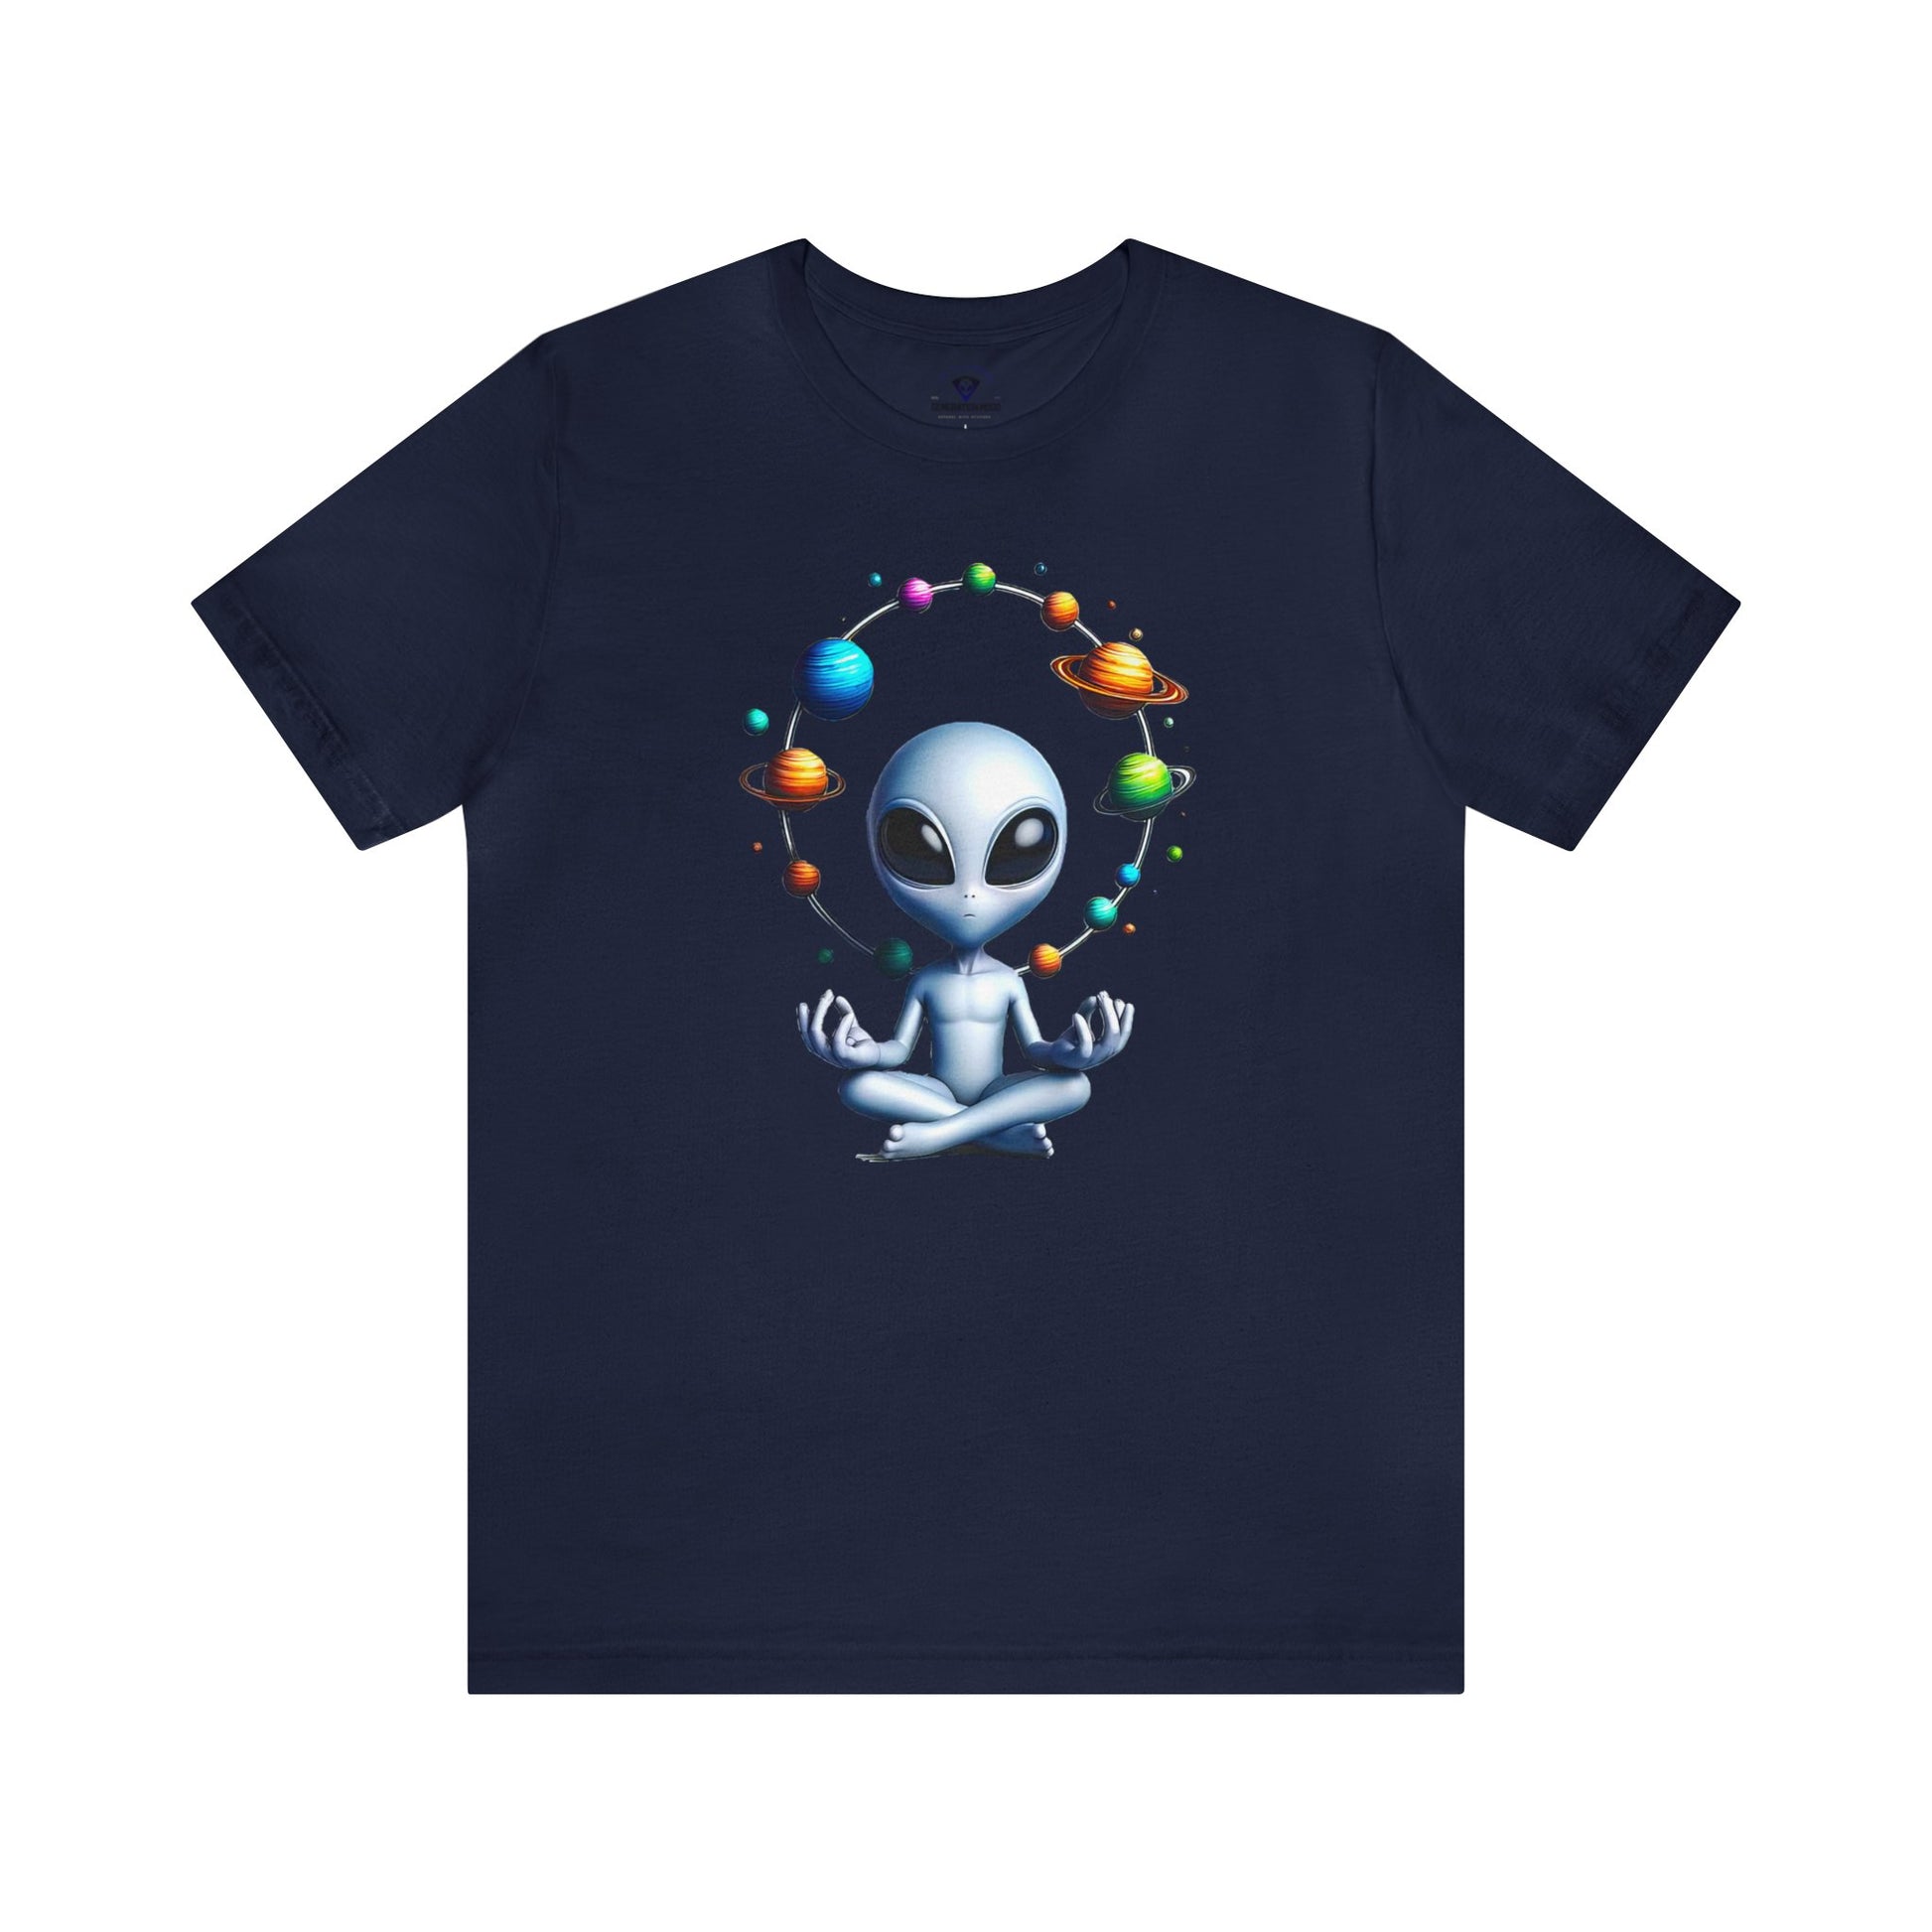 Generation Mood's Meditation in the Cosmos: Alien Sweatshirt , Find Your Zen Among the Planets shirt in navy.